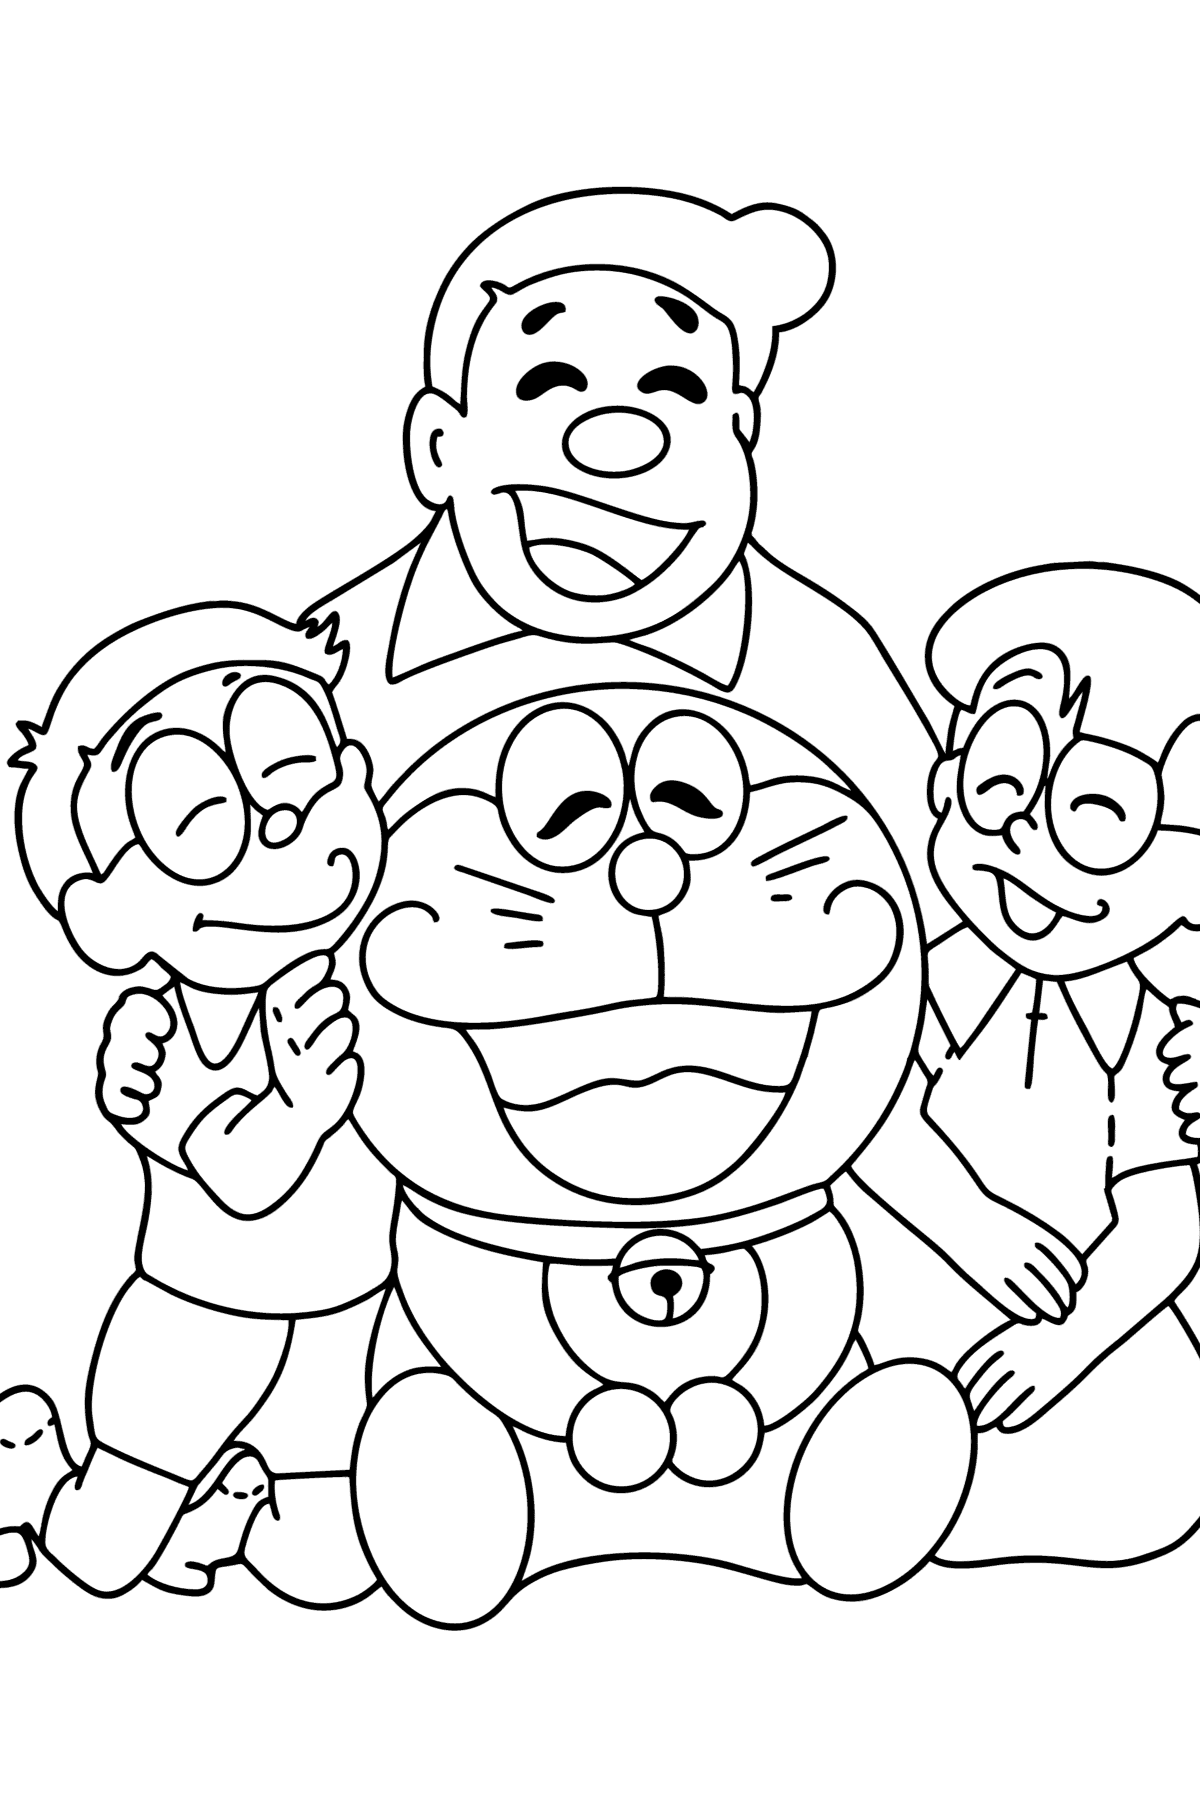 Doraemon family сoloring page - Coloring Pages for Kids